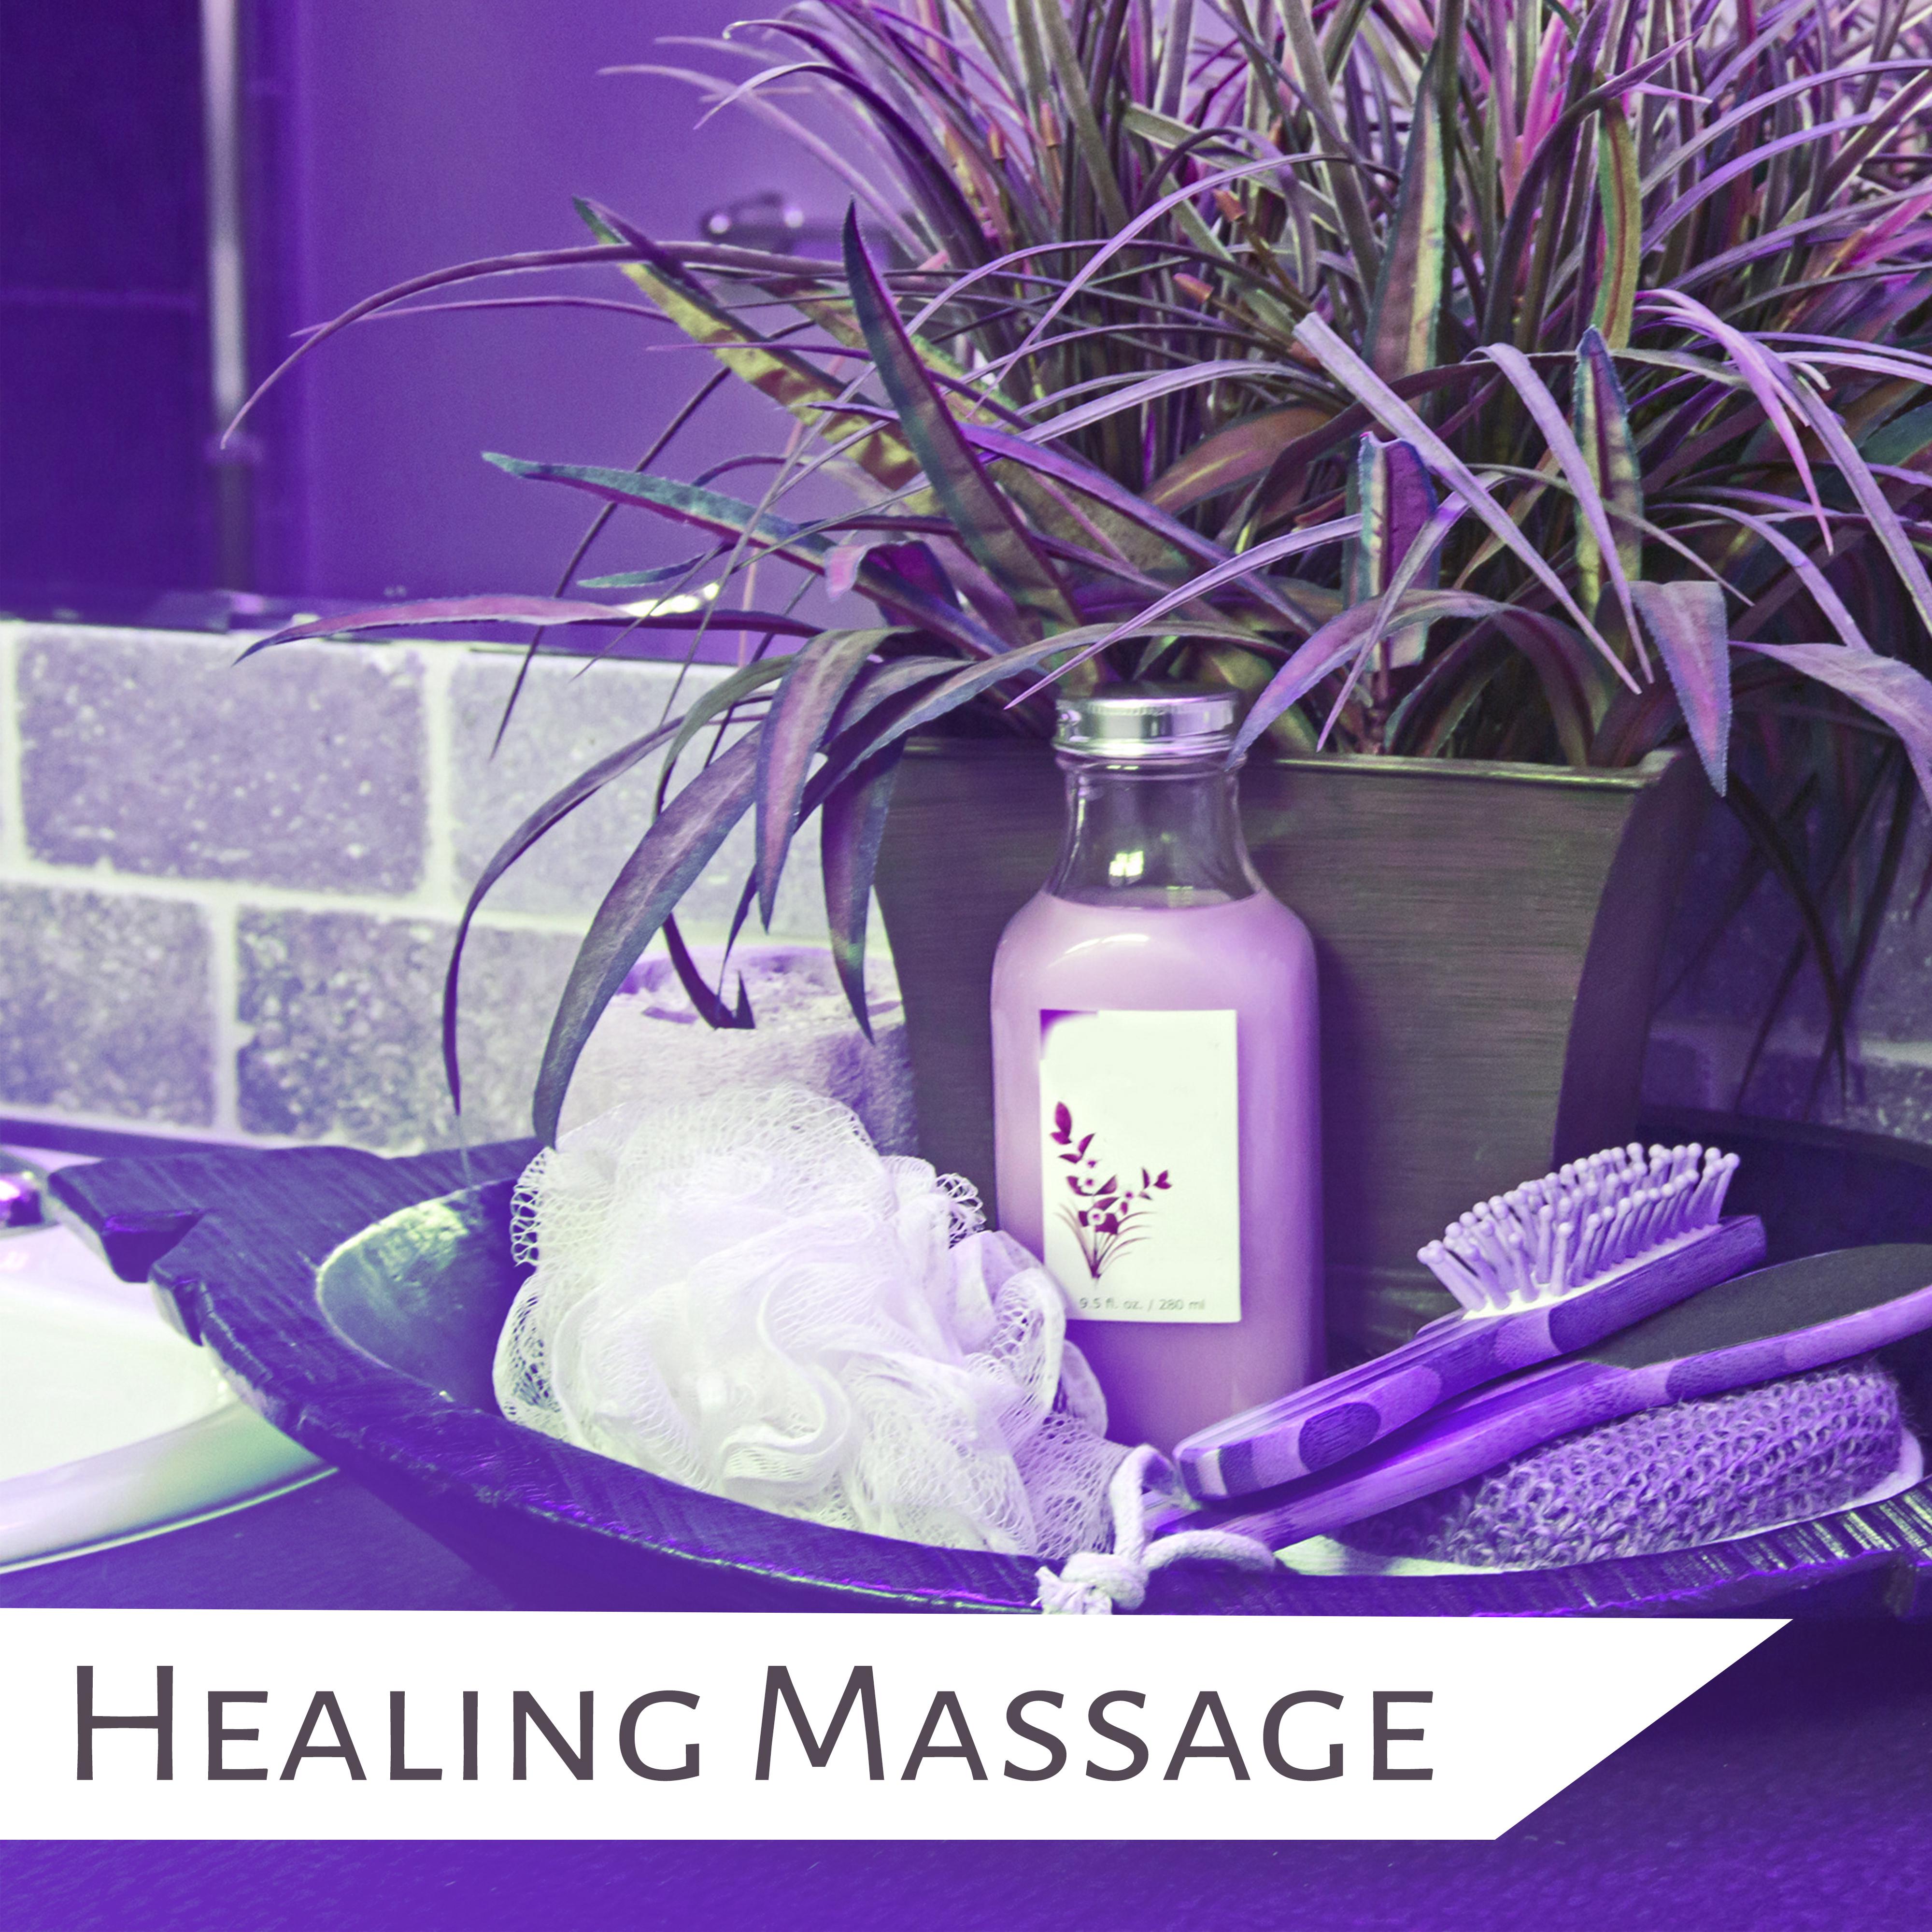 Healing Massage  Pure Relaxation, Music for Massage, Spa, Wellness, Bliss Therapy, Zen